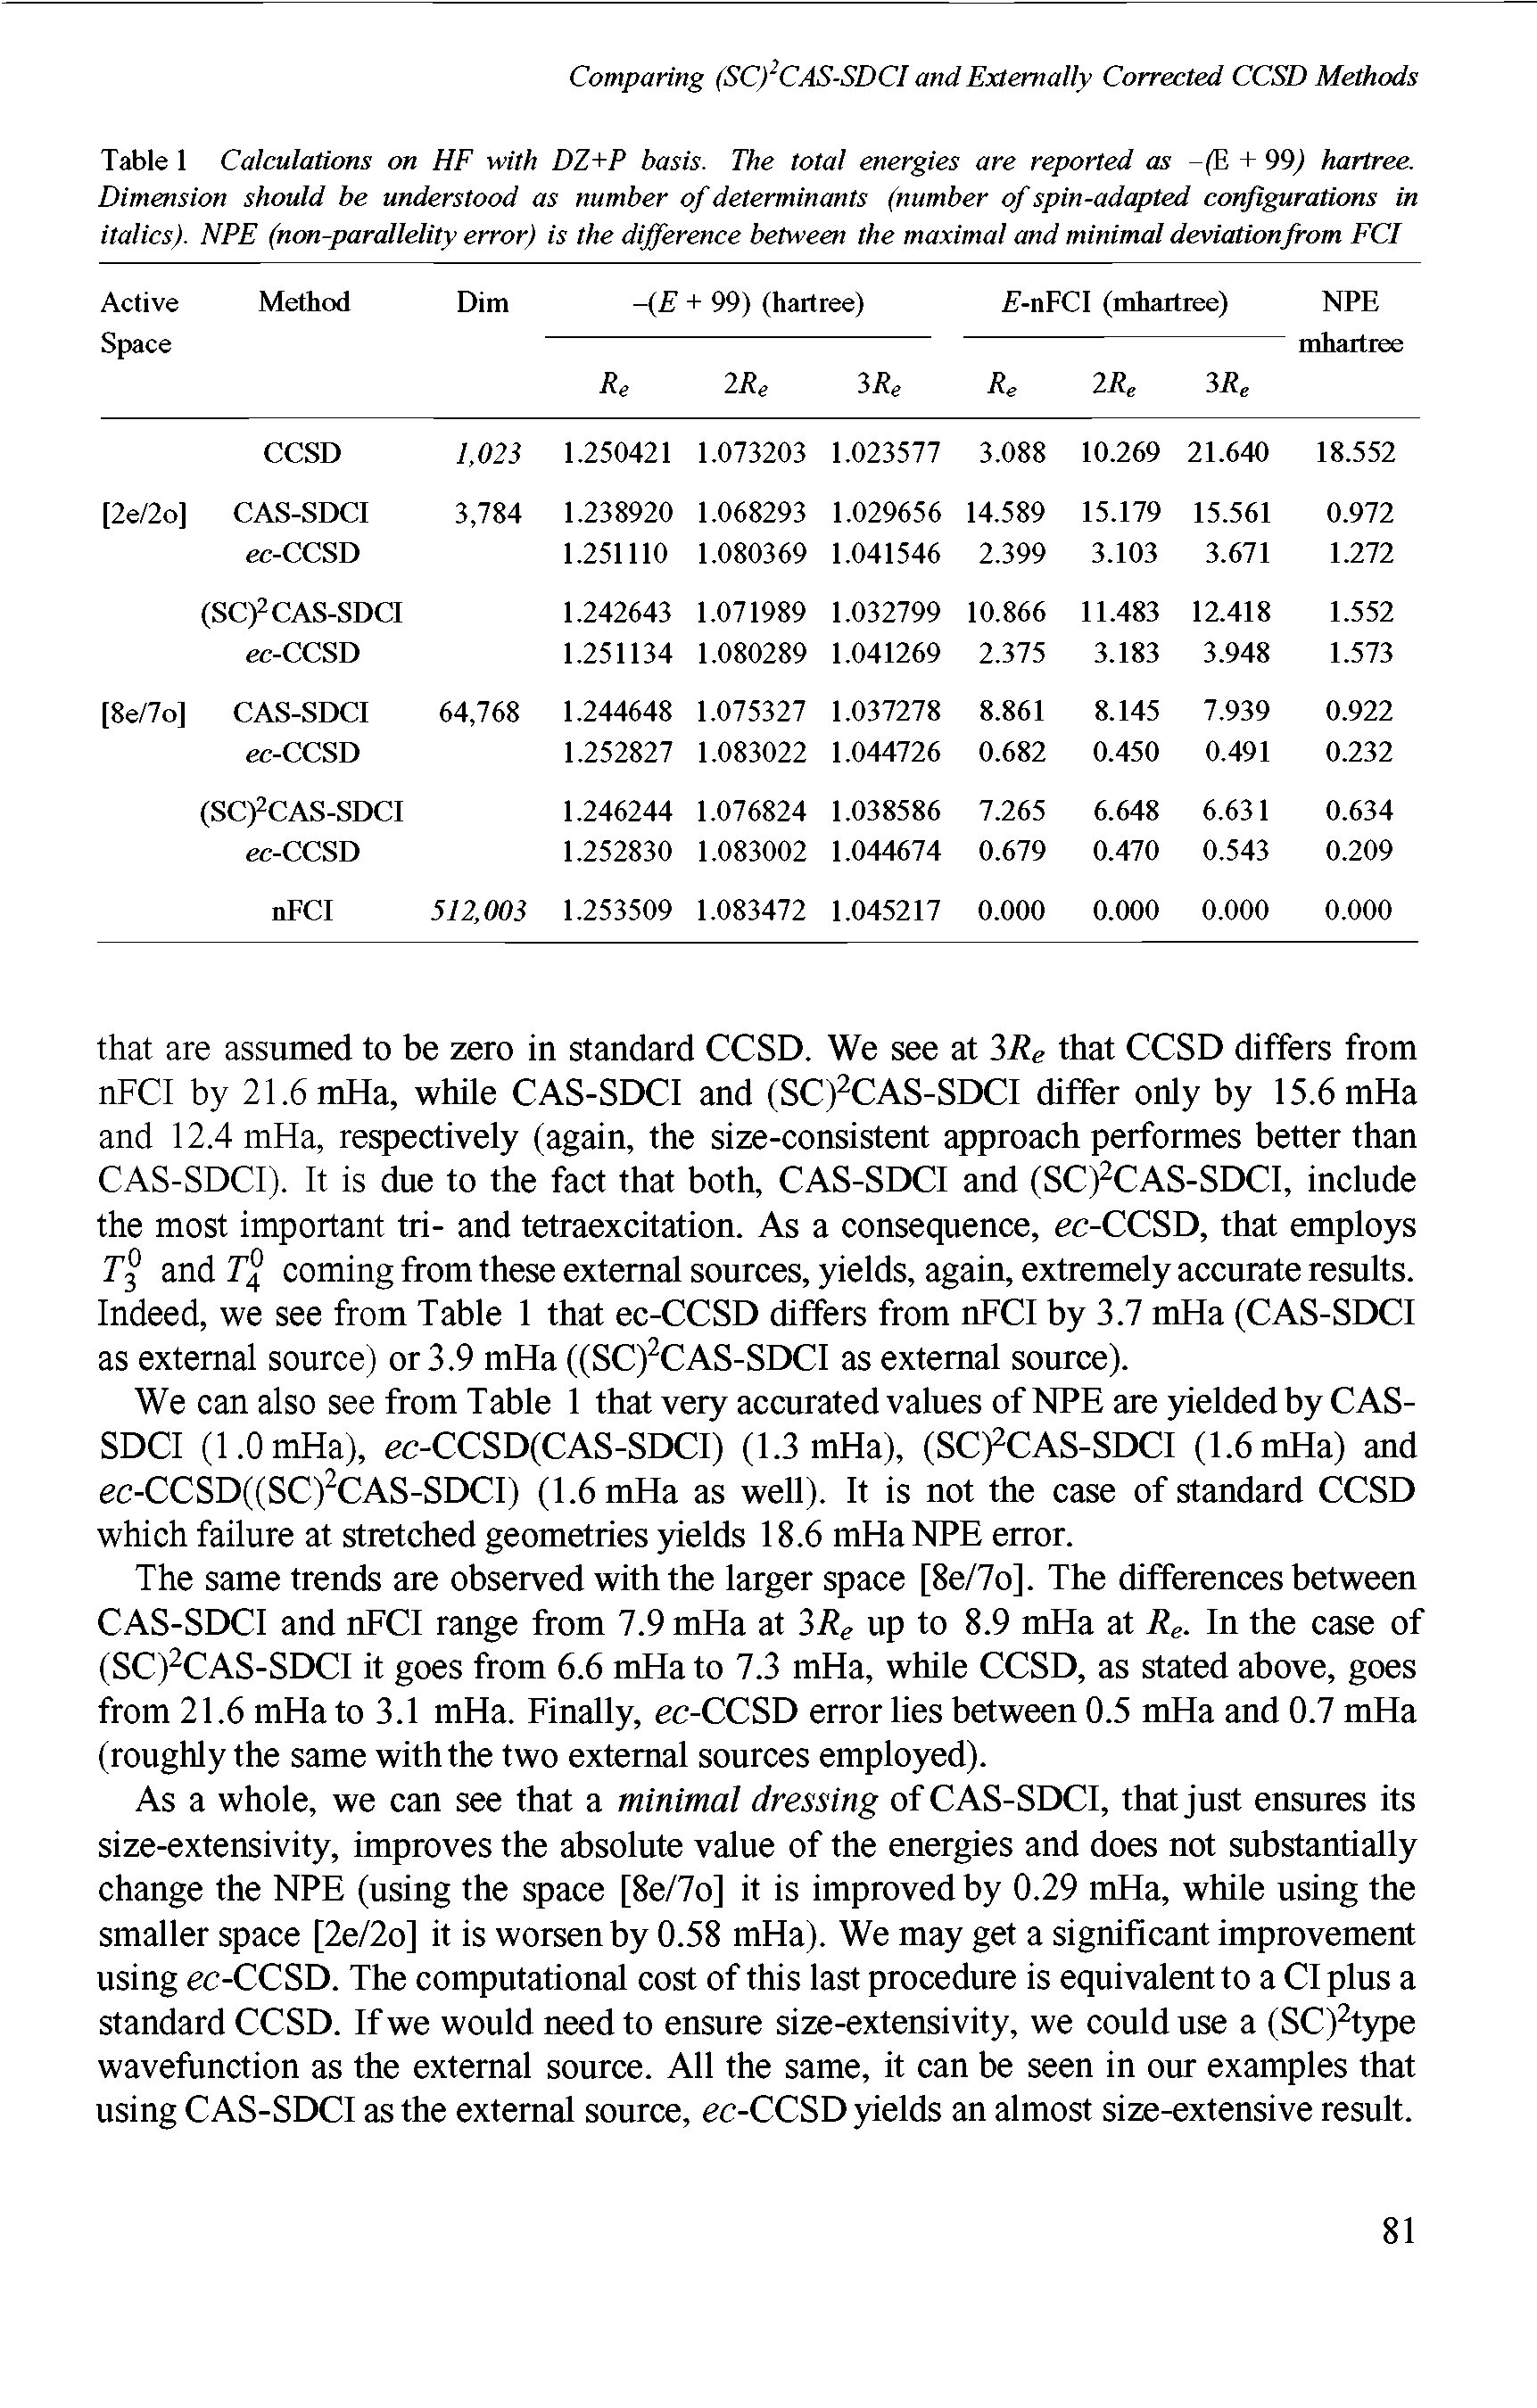 Table 1 Calculations on HF with DZ+P basis. The total energies are reported as -(E + 99) hartree. Dimension should be understood as number of determinants (number of spin-adapted configurations in italics). NPE (non-parallelity error) is the difference between the maximal and minimal deviation from FCI...